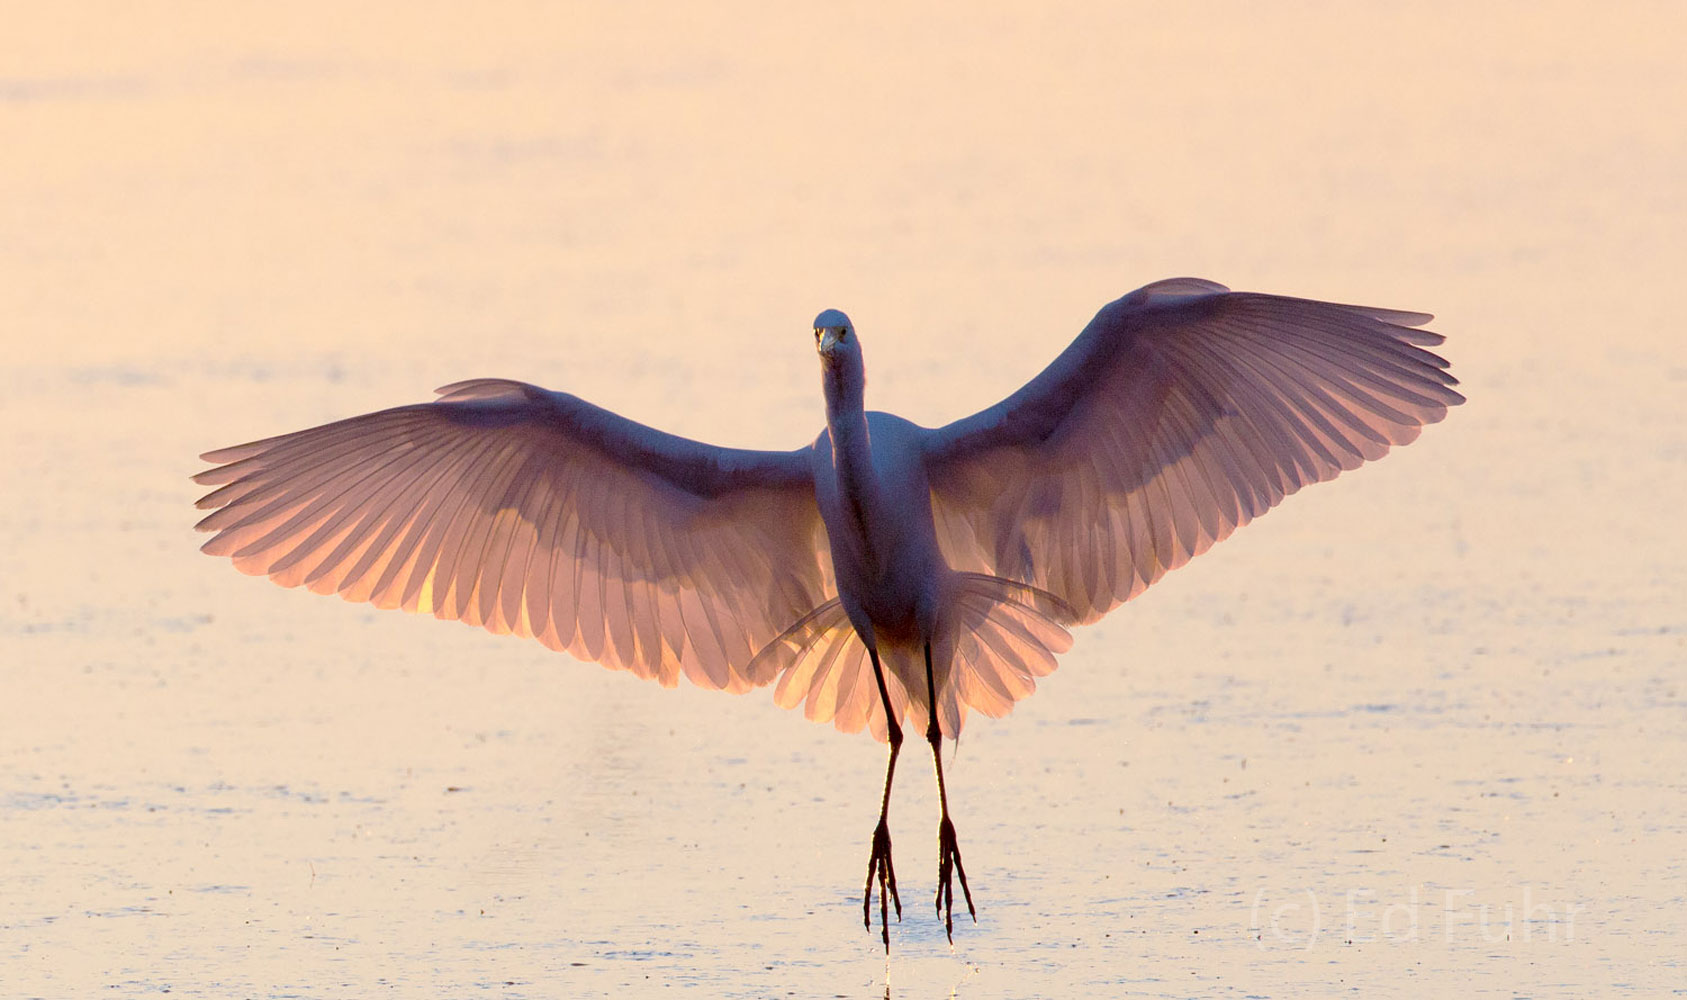 The rising sun illuminates the outstretched wings of this great white egret.